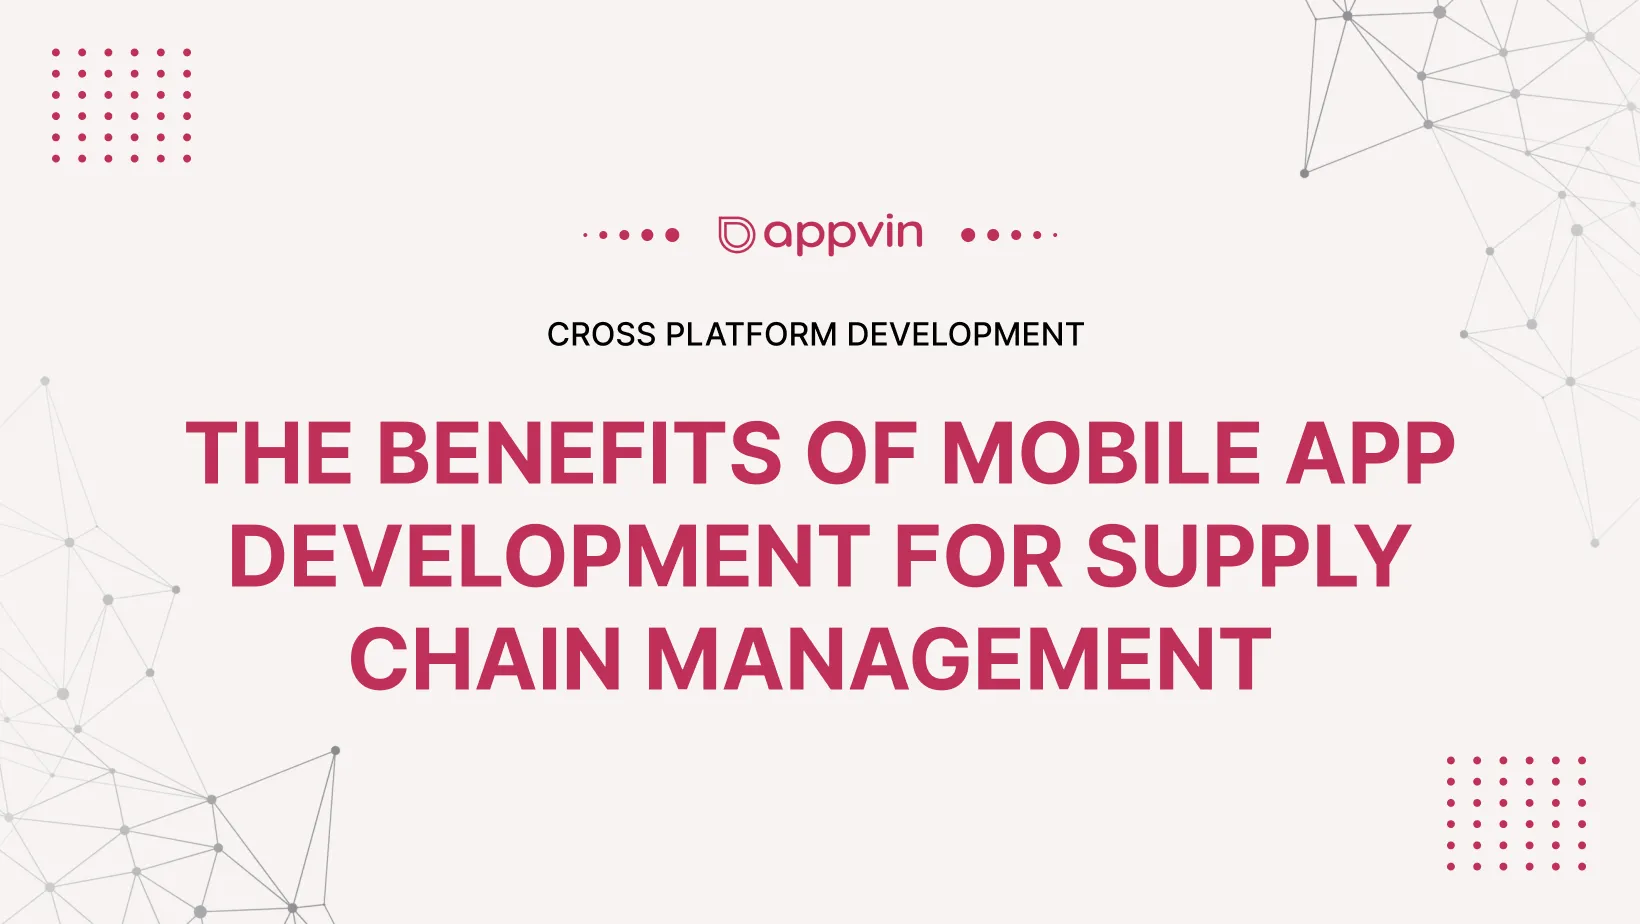 The benefits of mobile app development for supply chain management 